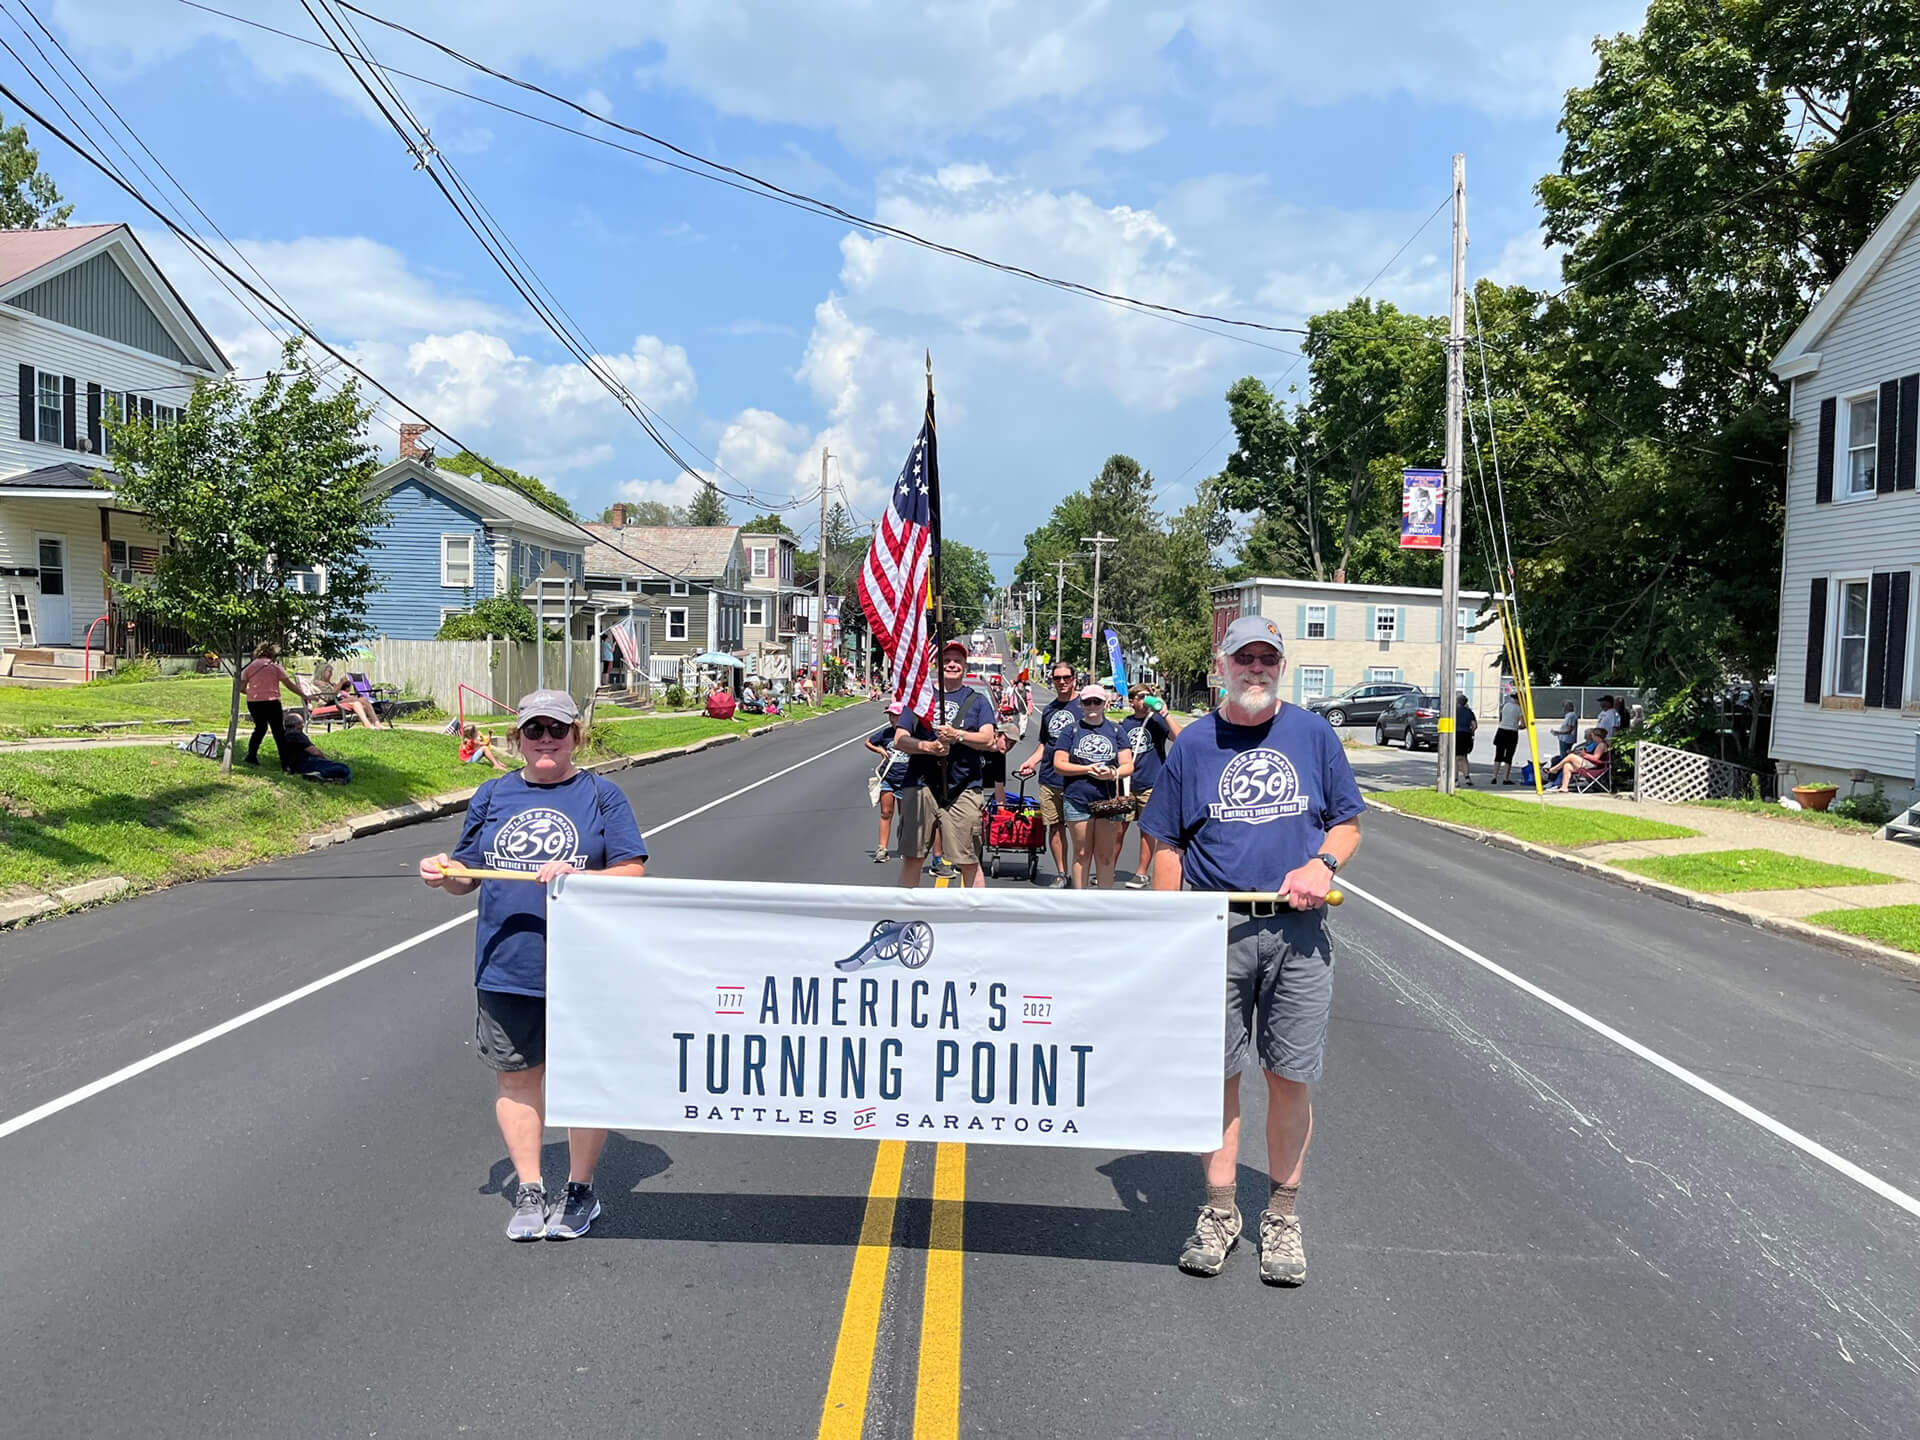 Saratoga 250 volunteers marching in a parade holding the American flag and a sign that reads "America's Turning Point - Battles of Saratoga (1777-2027)"